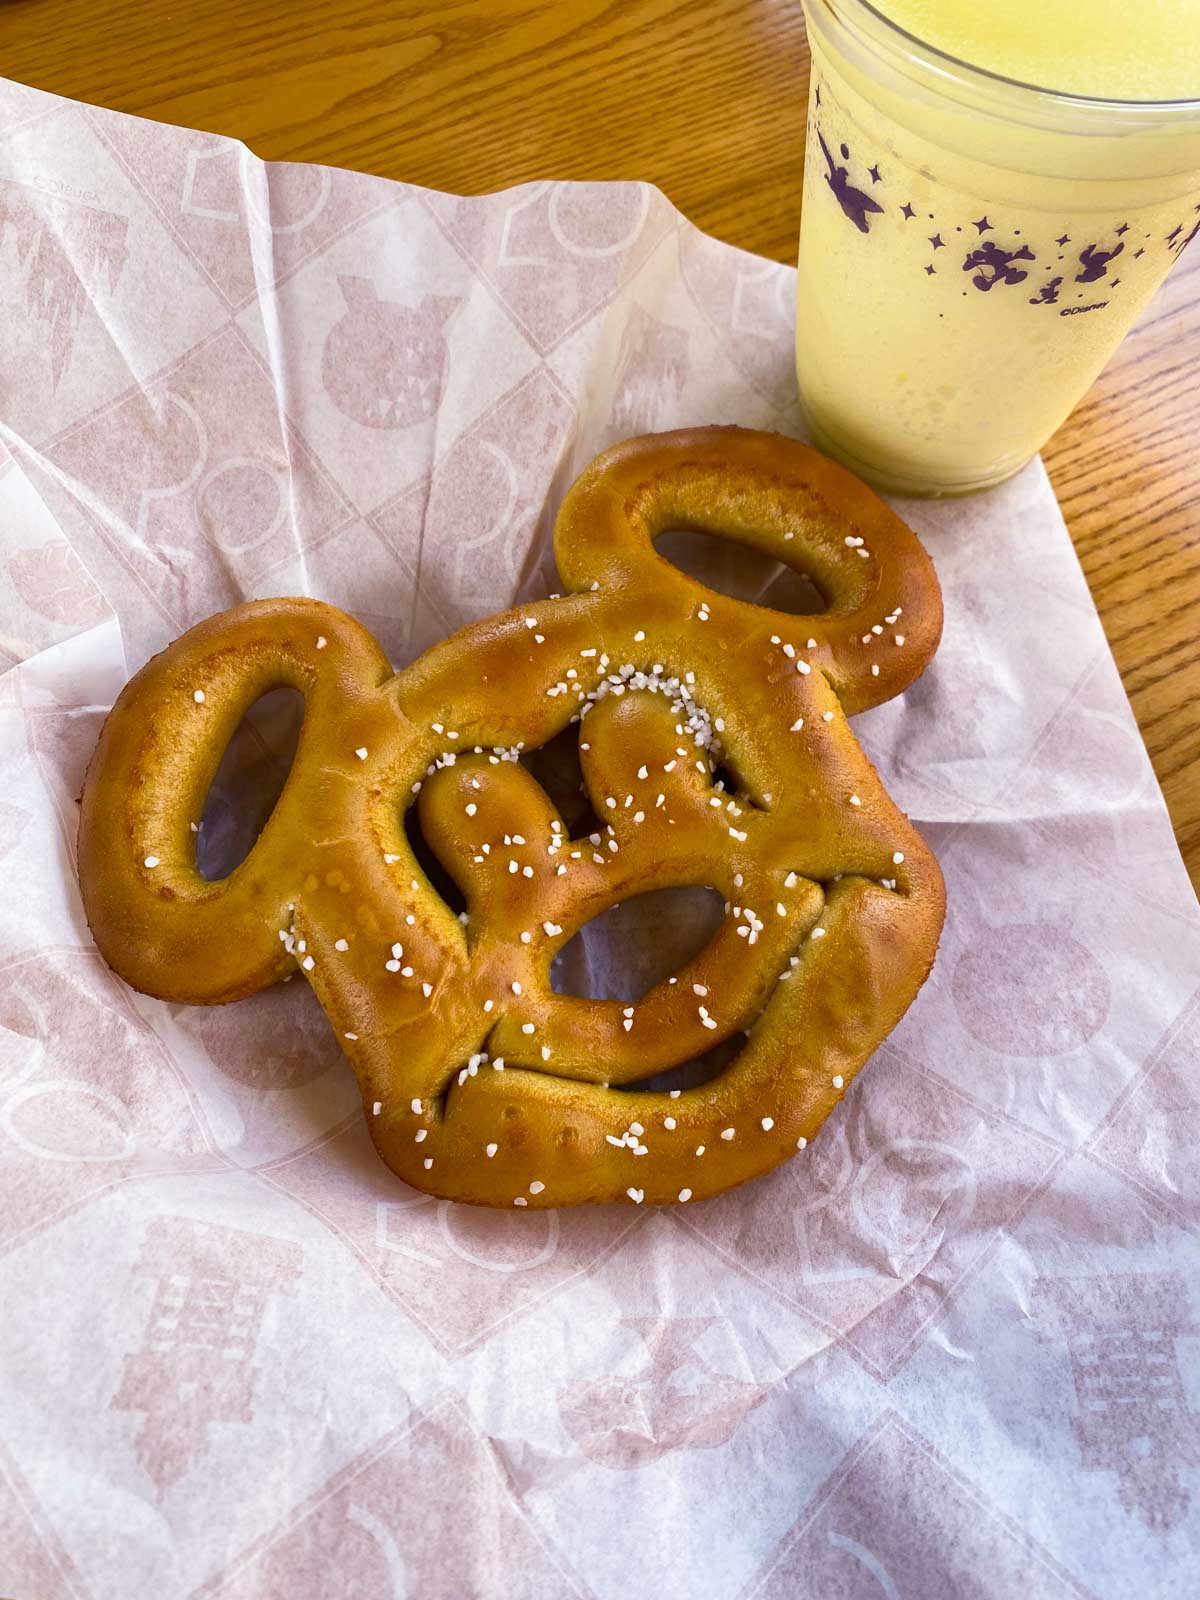 A salted Mickey Mouse shaped soft pretzel on a paper next to a frozen lemonade.